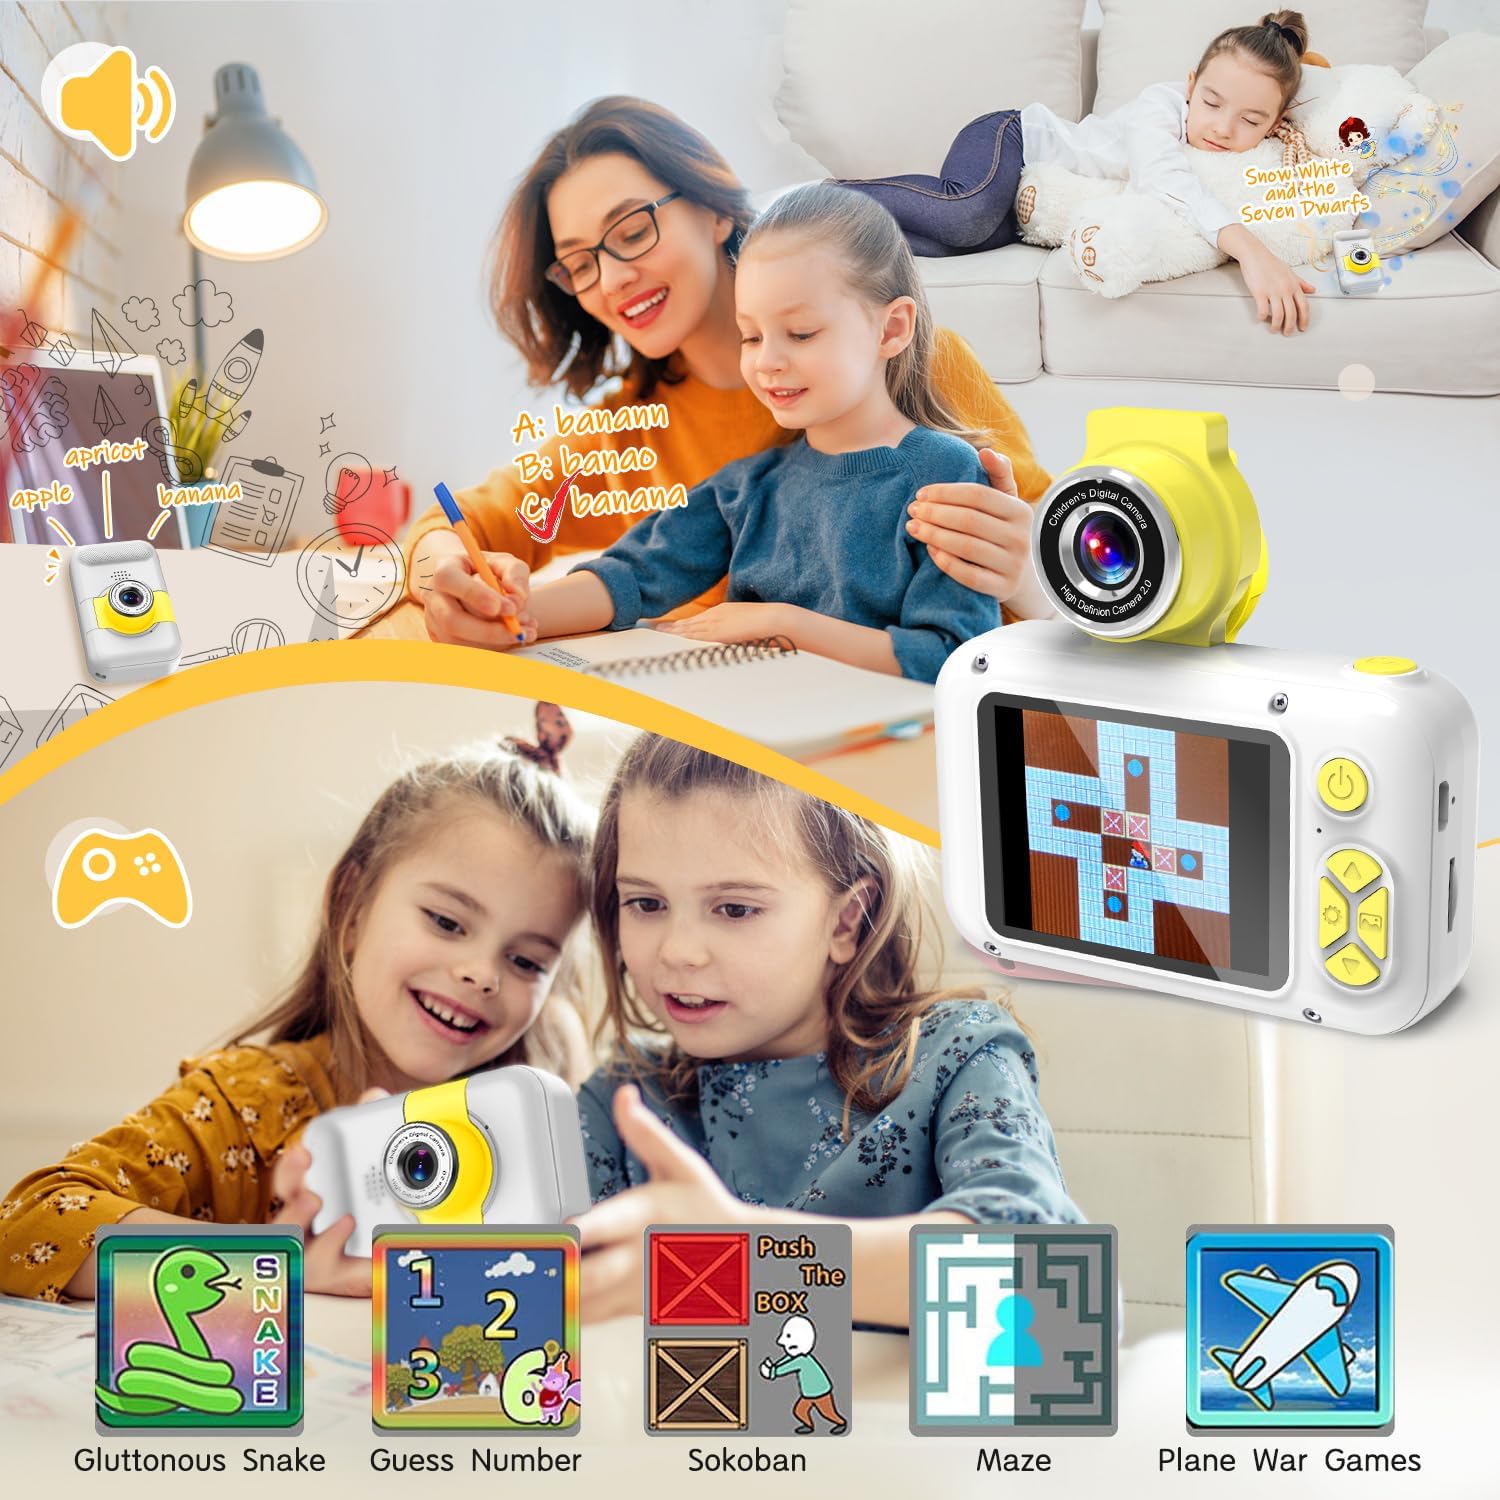 Kid Camera,ARNSSIEN Camera for Child,2.4in IPS Screen Digital Camera,180°Flip Len Student Camera,Children Selfie Camera with Playback Game,Christmas/Birthday Gift for 4 5 6 7 8 9 10 11 Cycle Old Girl Boy